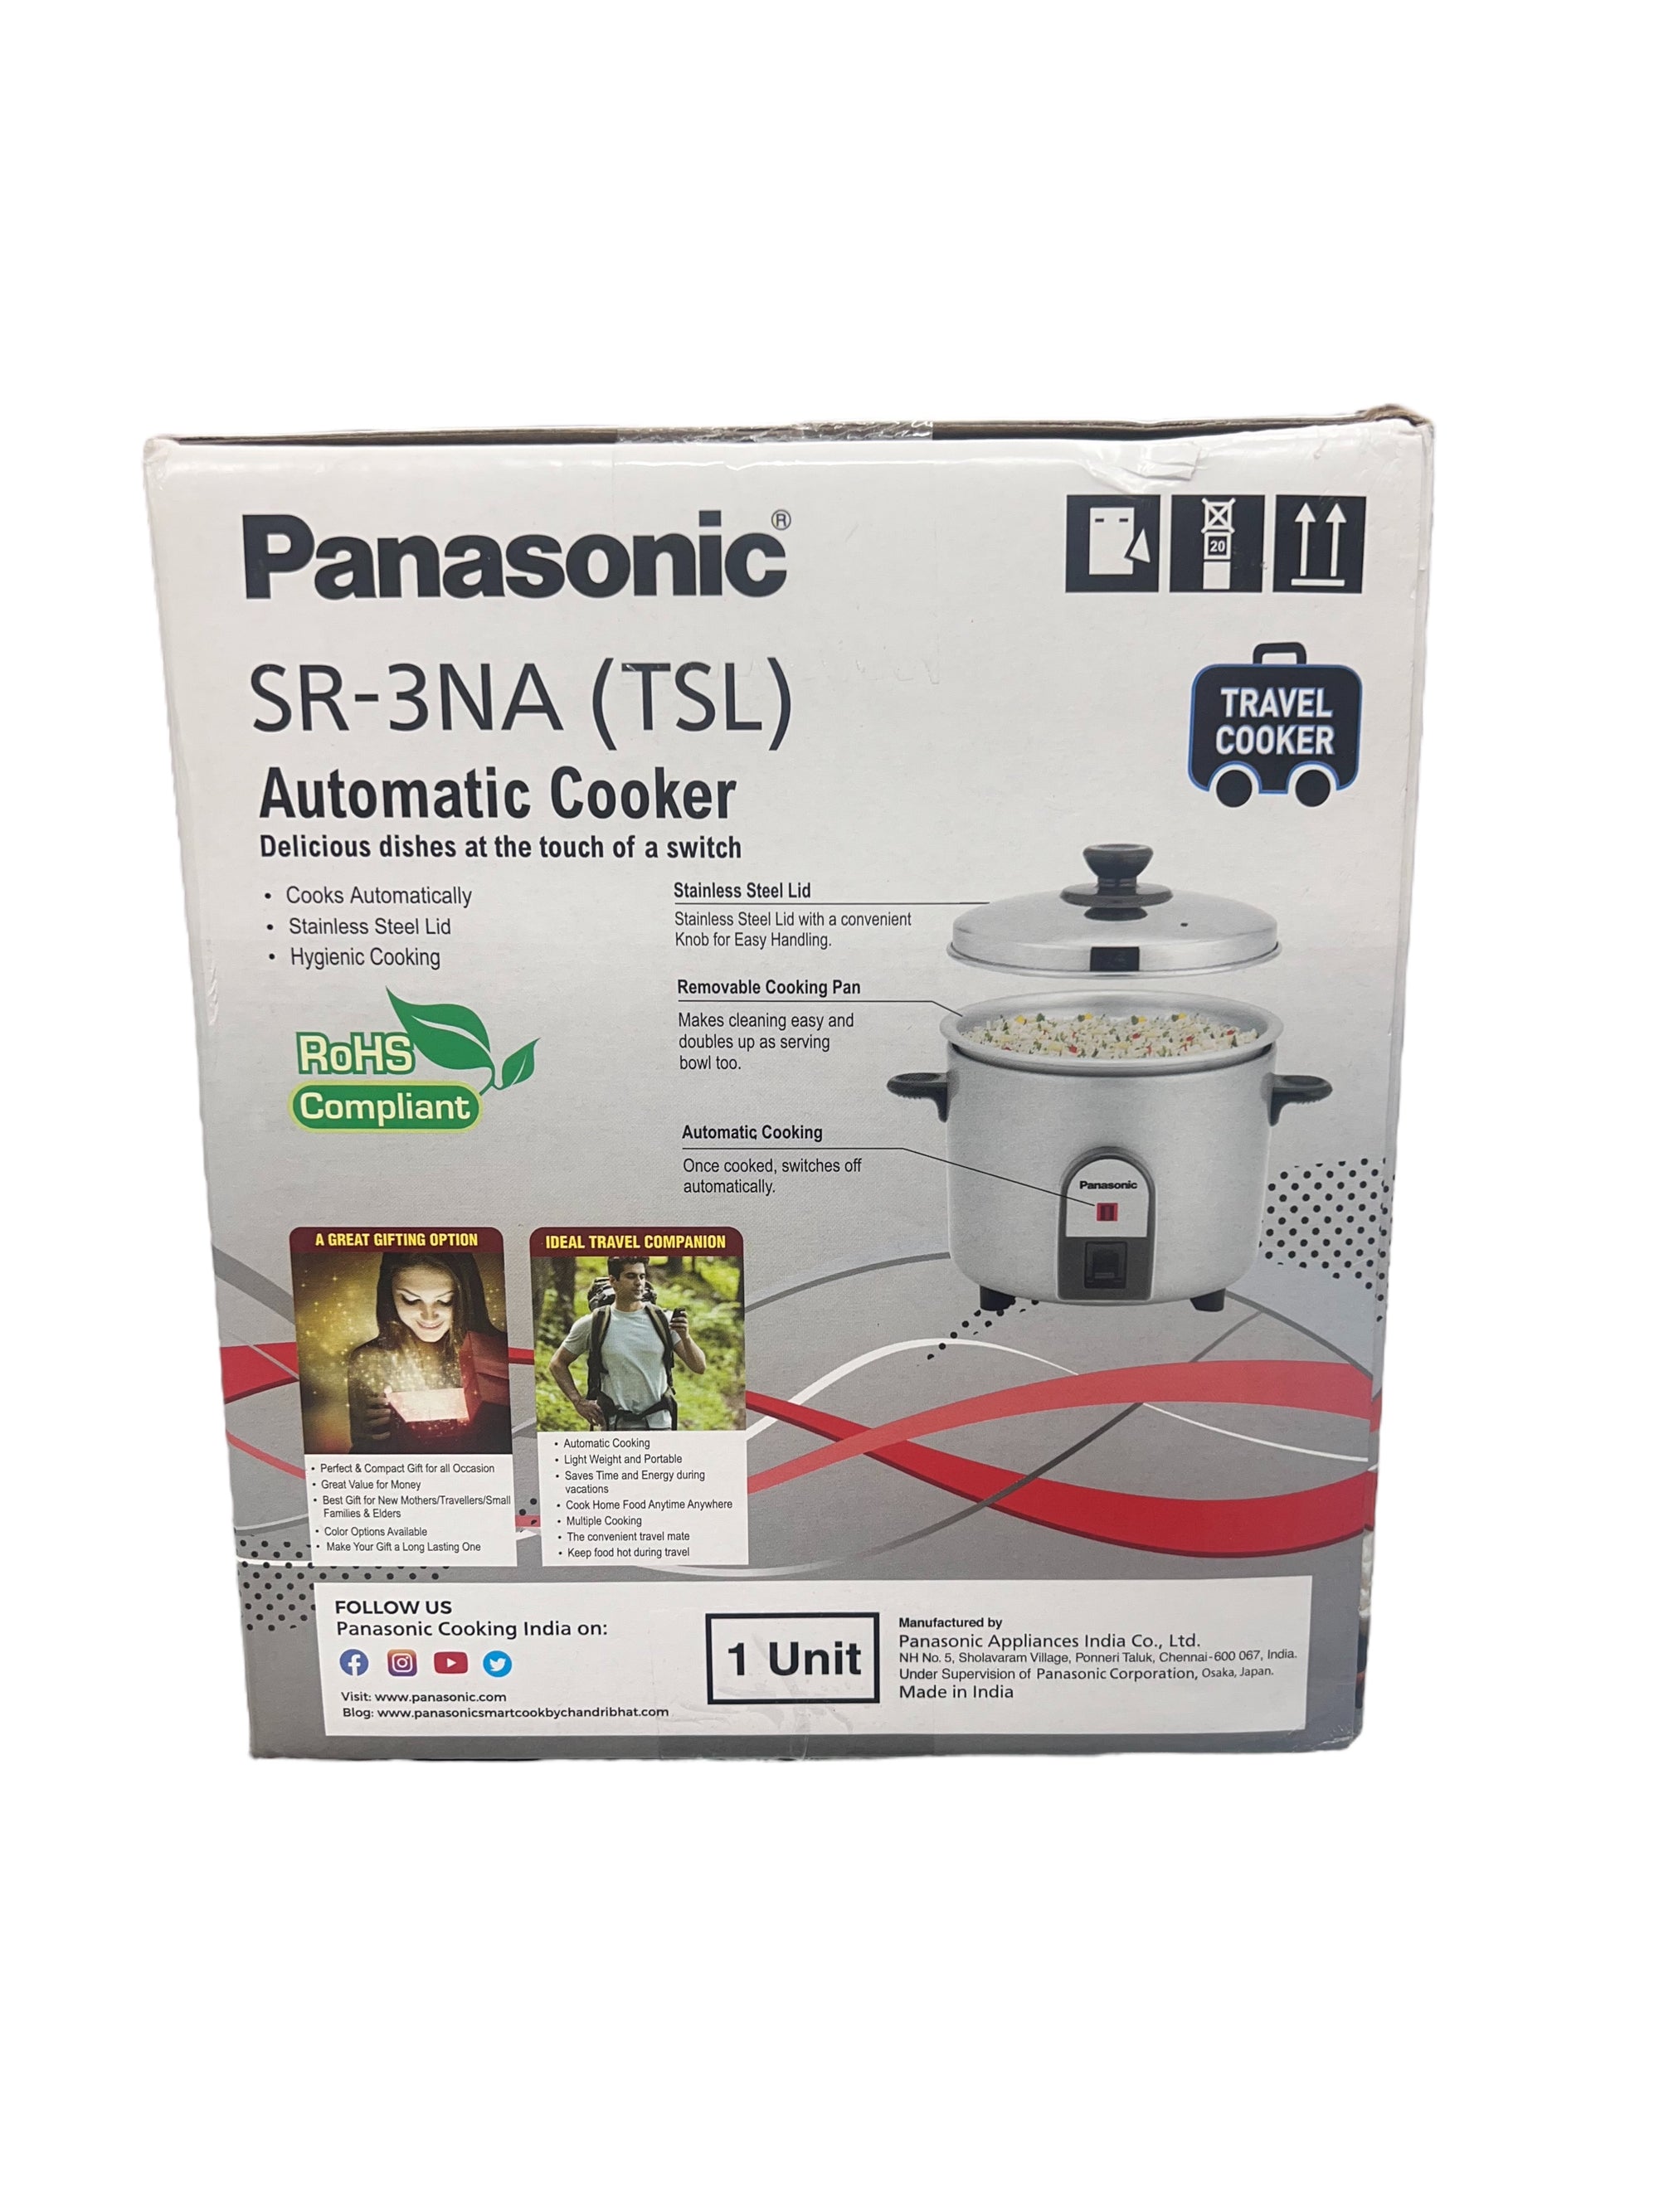 Panasonic 0.3L Portable Travel Rice Cooker: Bachelor & Baby Cooker for On-the-Go Gourmet Meals 🌍